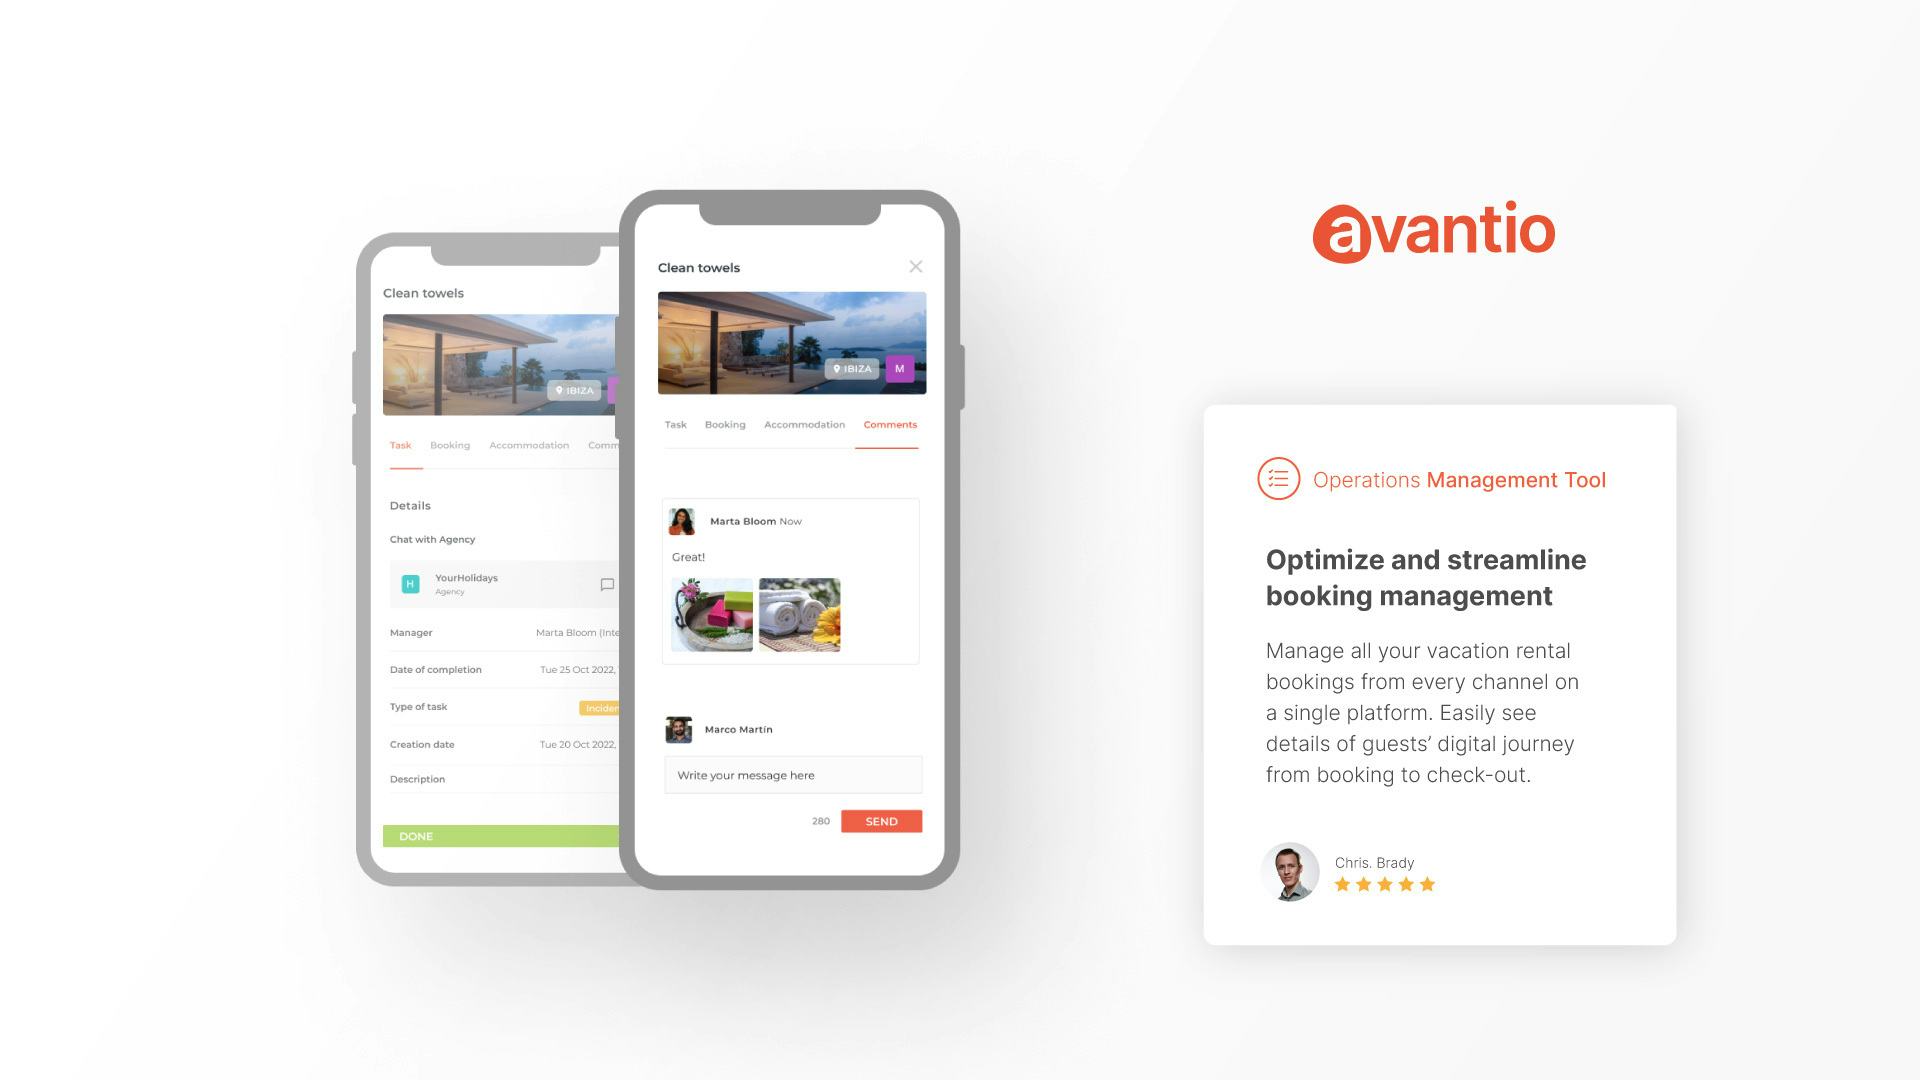 Avantio Software - Upgrade task management with Avantio’s Operations Management Tool, managing instant communication with all maintenance stakeholders, making task management for vacation rentals a breeze.